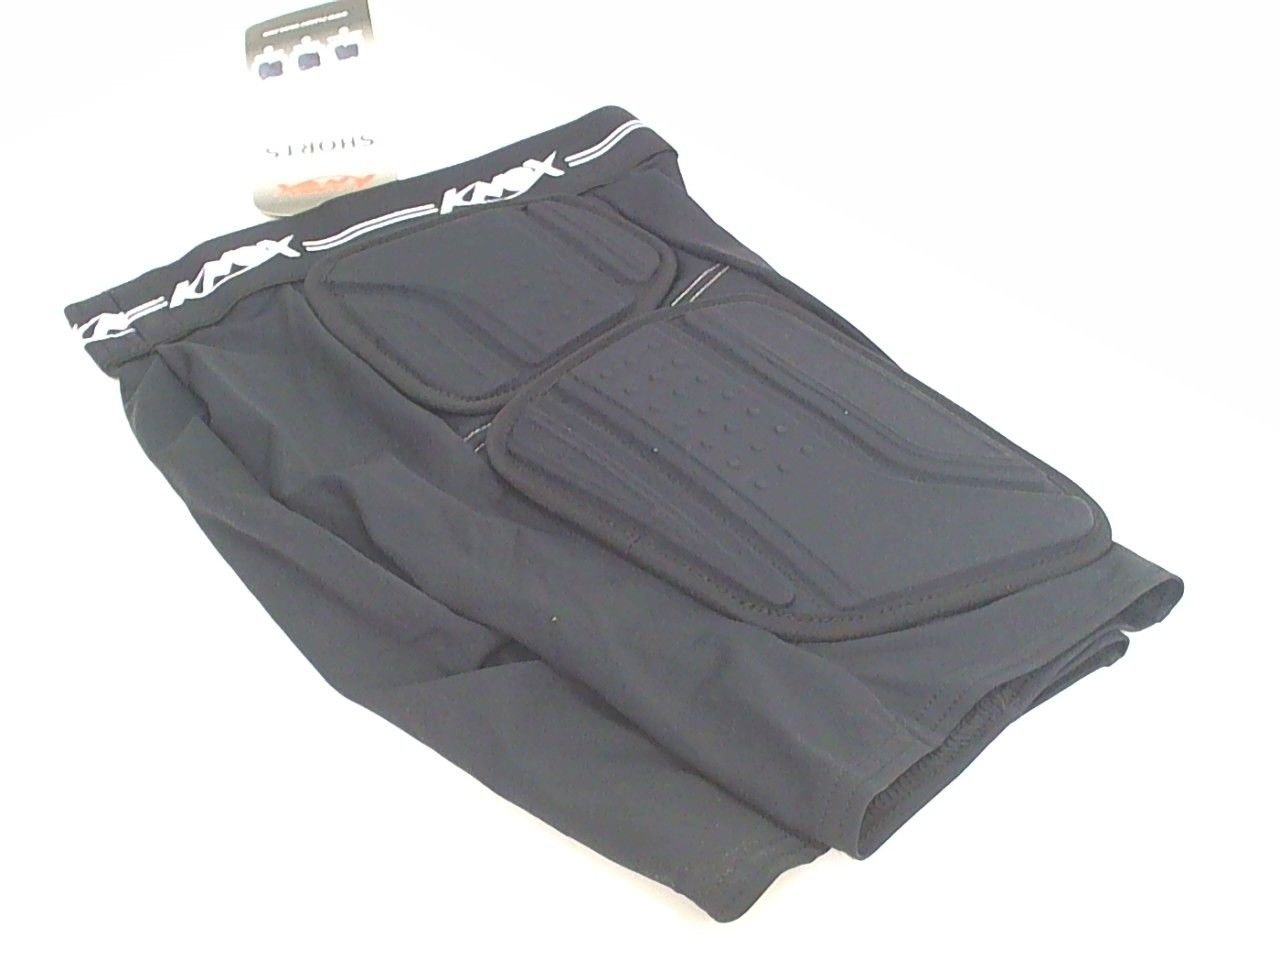 KNOX Guerilla Wicking Armored Shorts Motorcycle Motocross Padded Hip ...